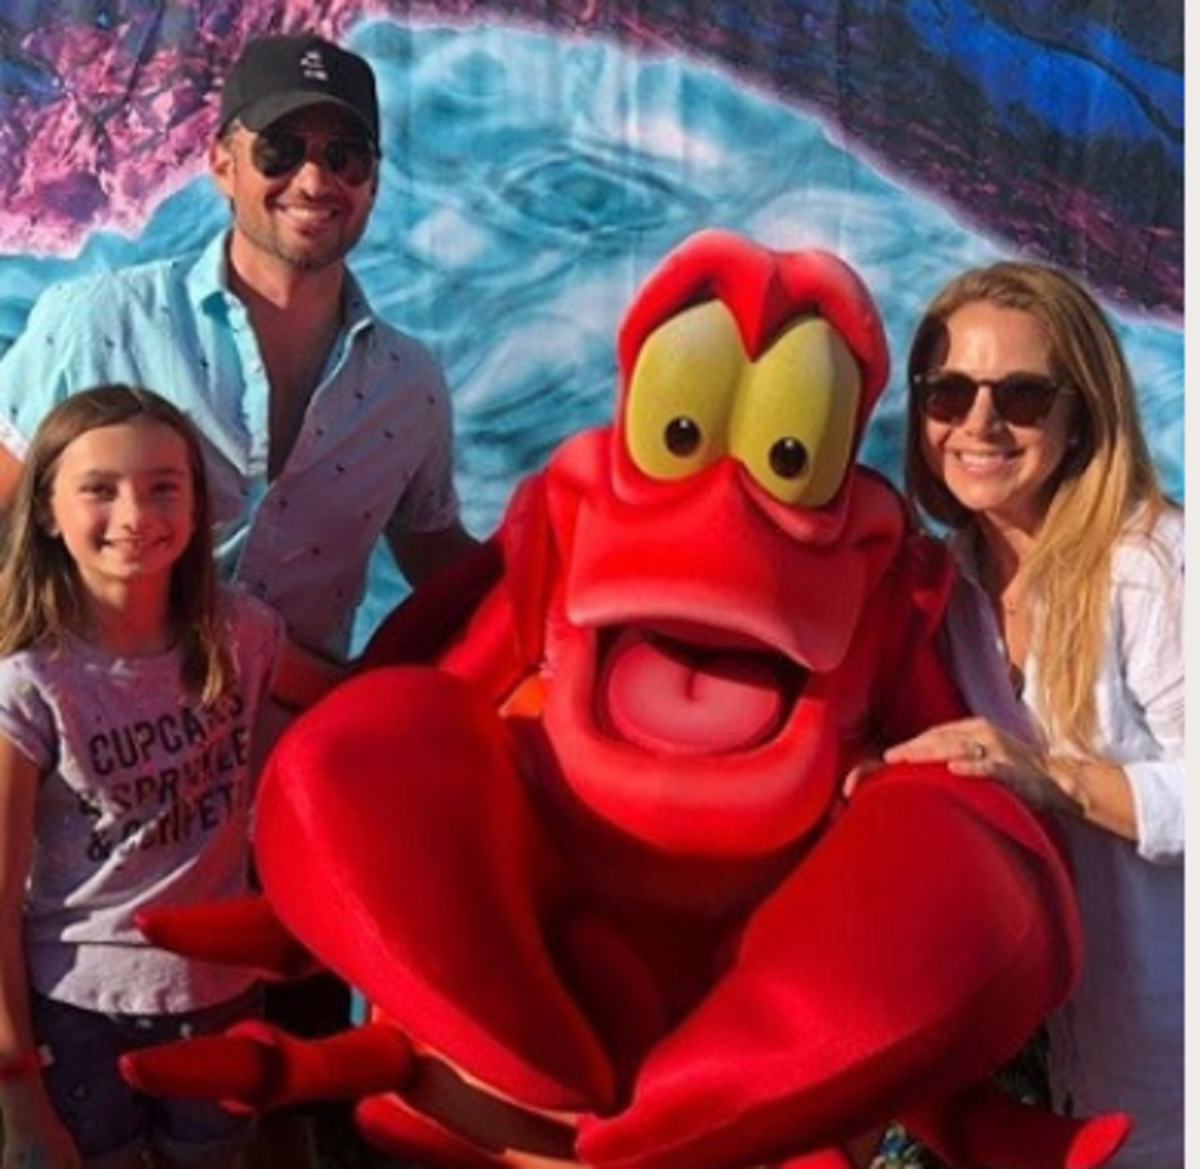 Wes Brown with wife Amanda and daughter Merribeth